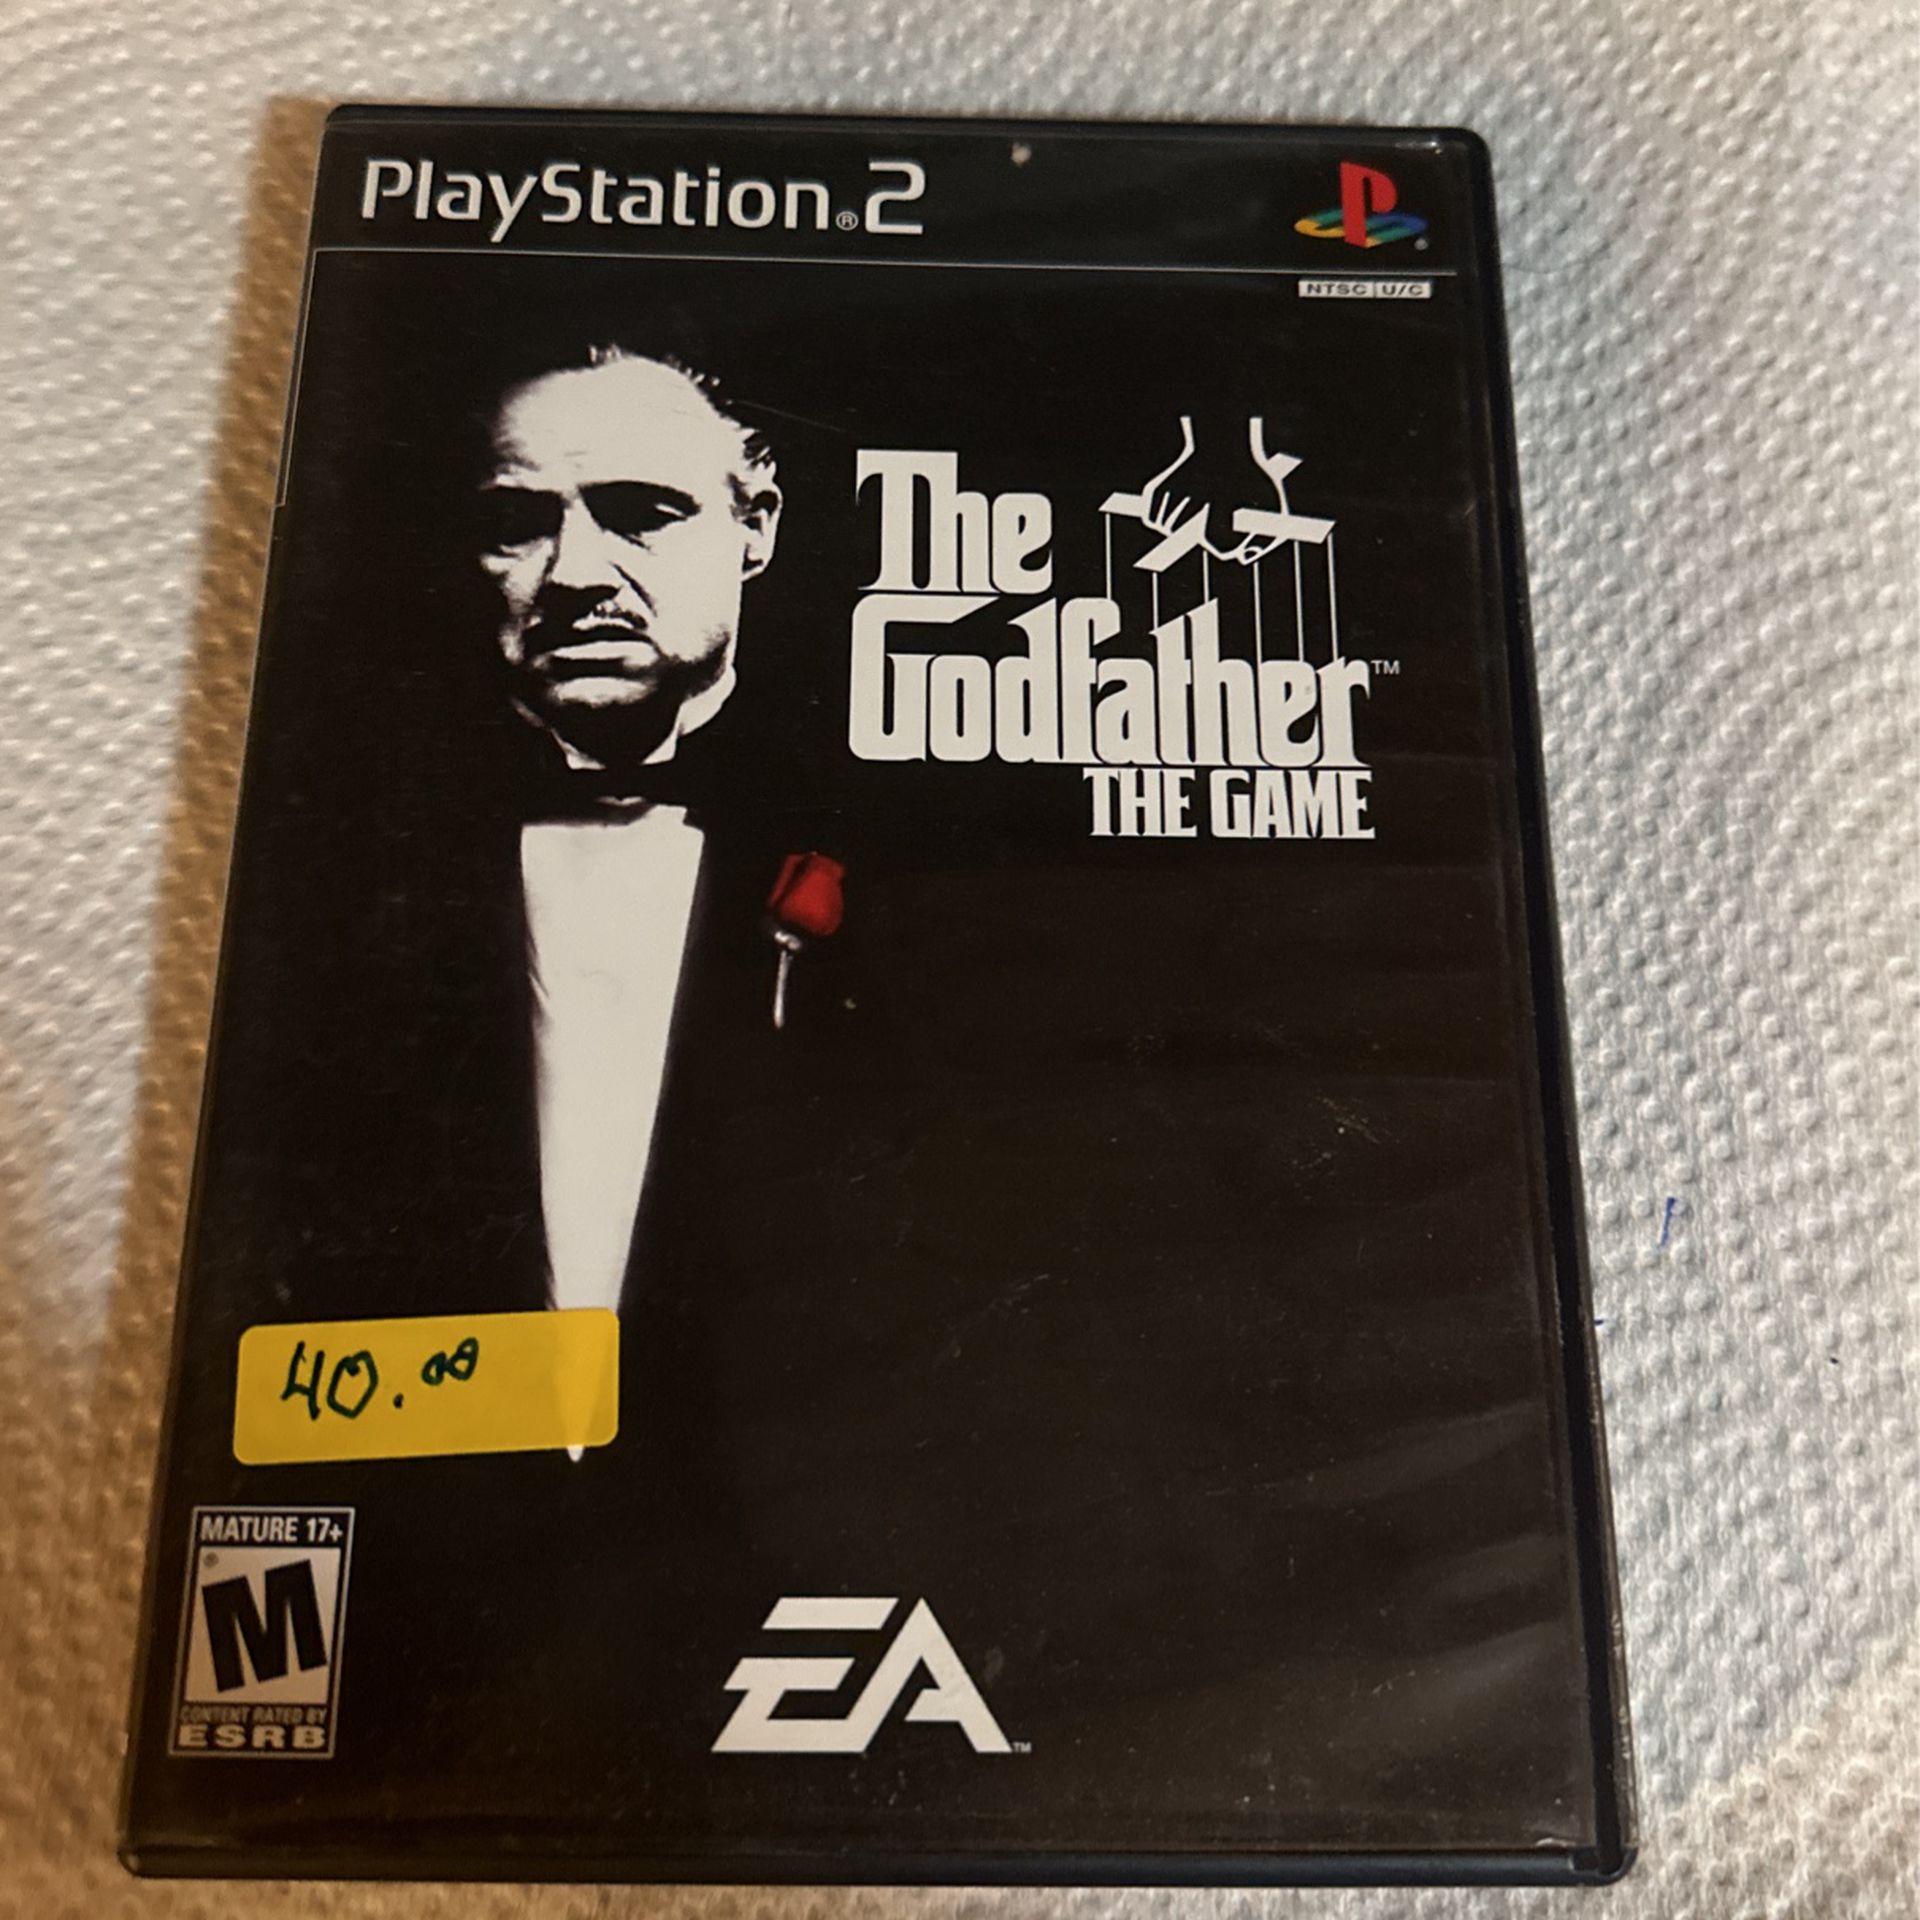 Playstation 2, The Godfather The Game